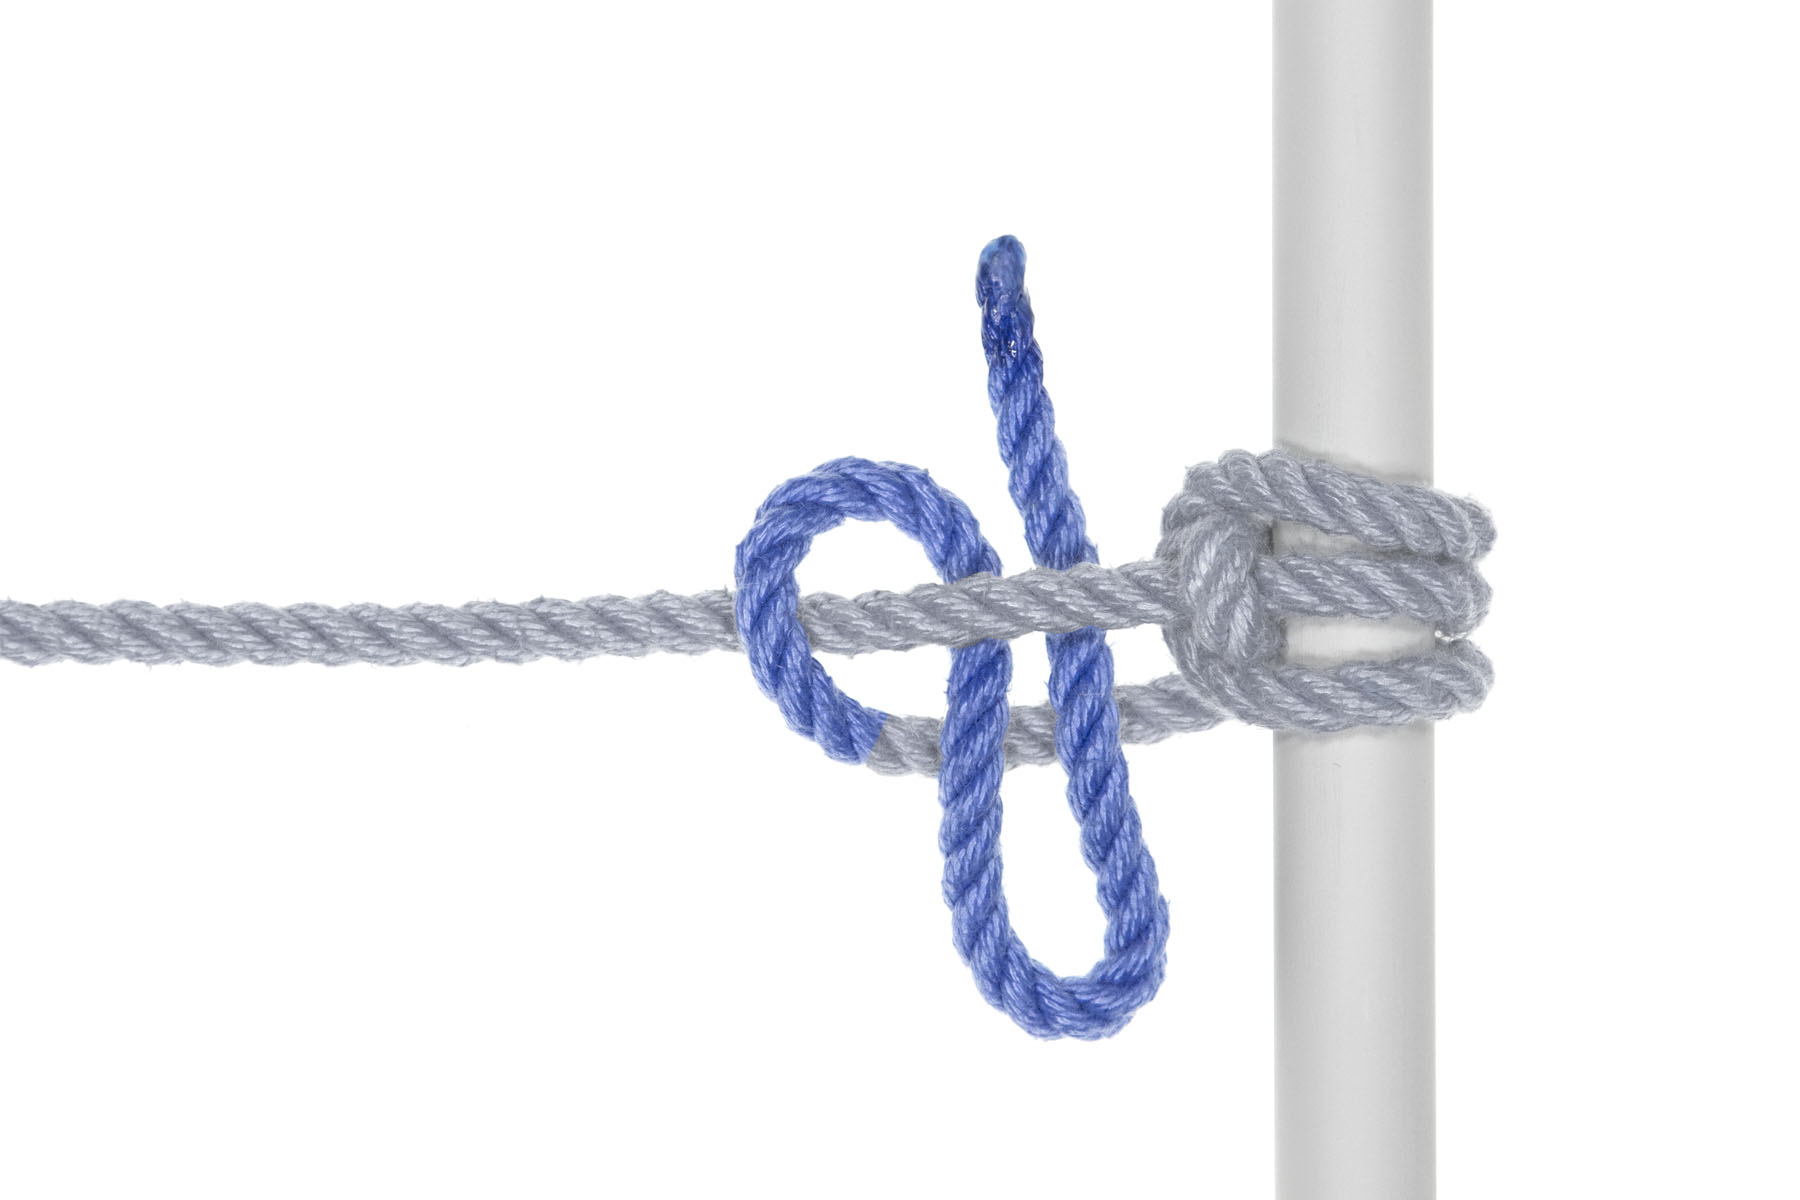 The working end makes a slipped half hitch around the standing part. It goes over the standing part and then forms a bight that goes under the standing part and over the working end.